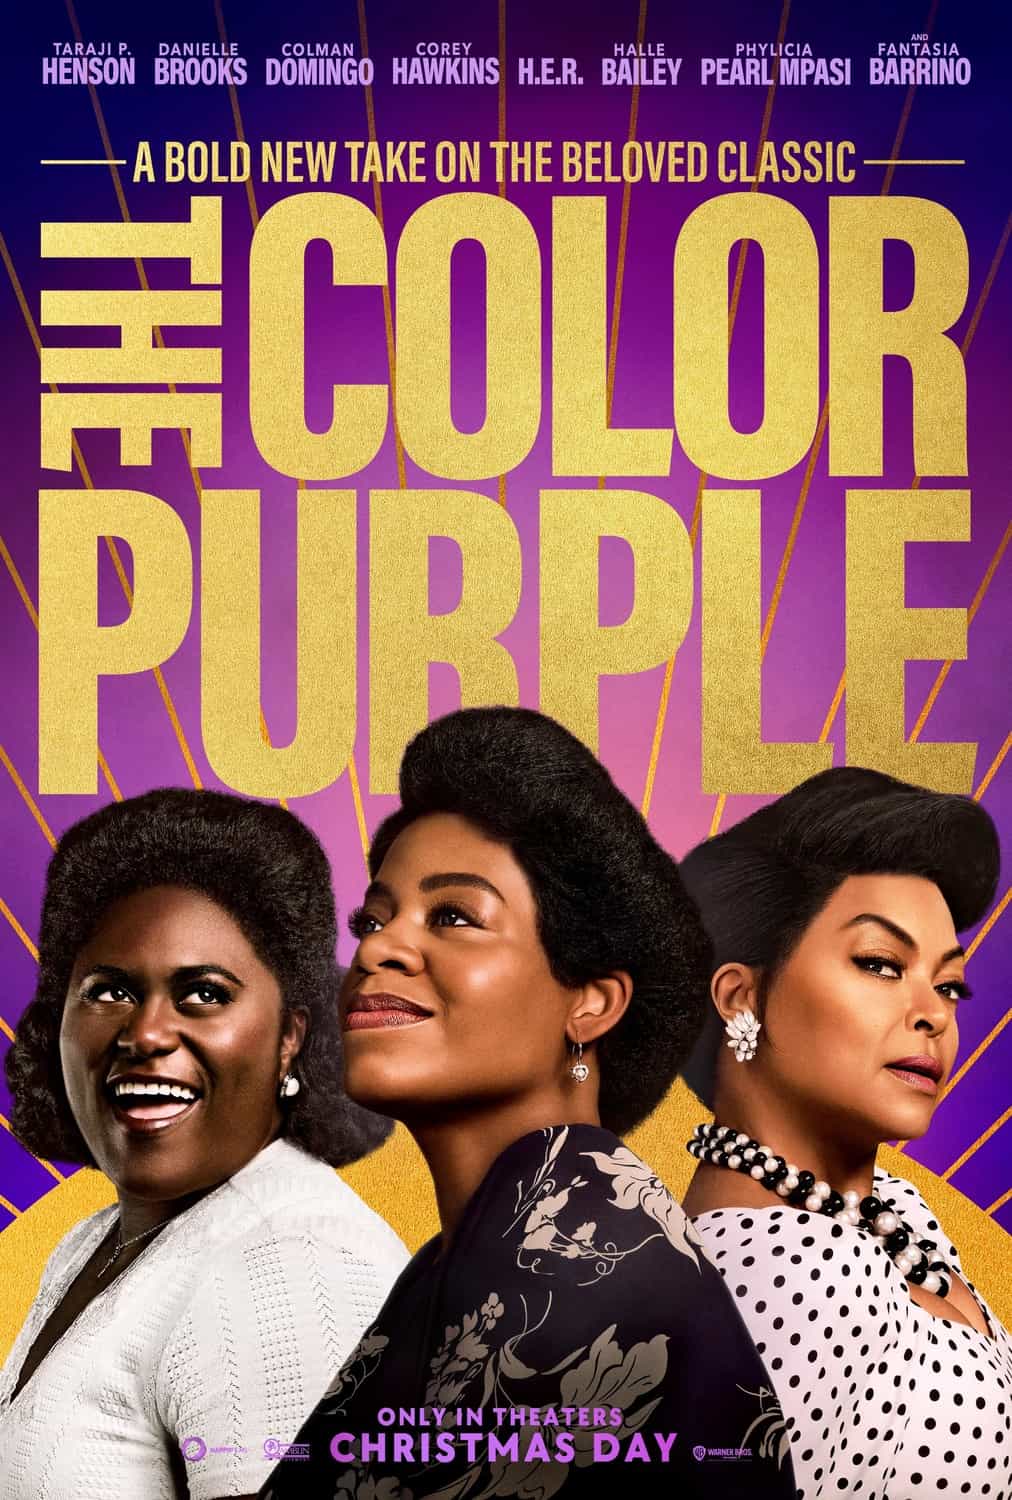 Check out the new trailer for upcoming movie The Colour Purple which stars Taraji P. Henson and Danielle Brooks - movie UK release date 26th January 2024 #thecolourpurple